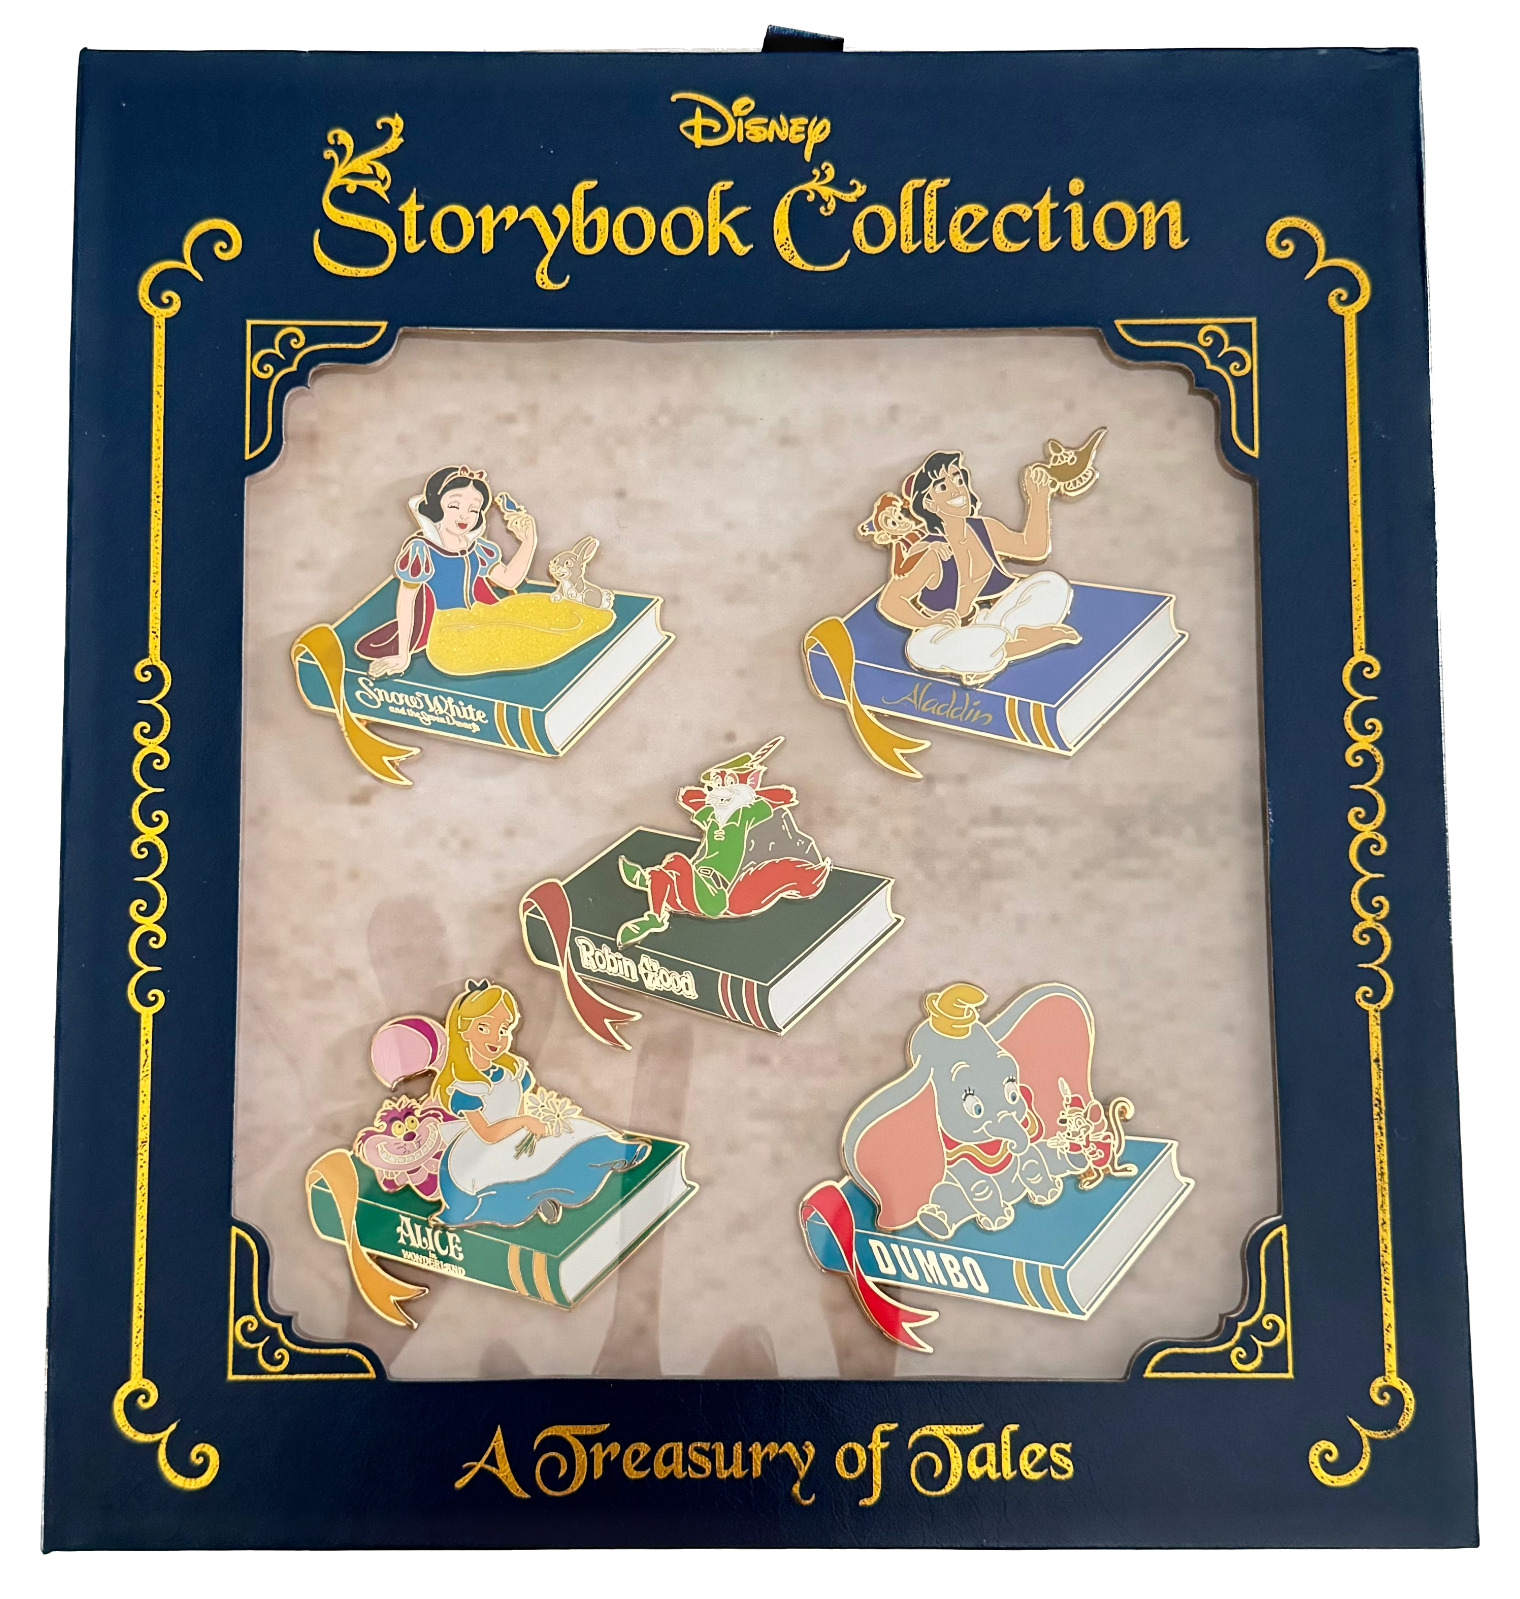 2017 D23 Expo WDI Storybook Collection A Treasury of Tales Set of 5 Pins LE 250